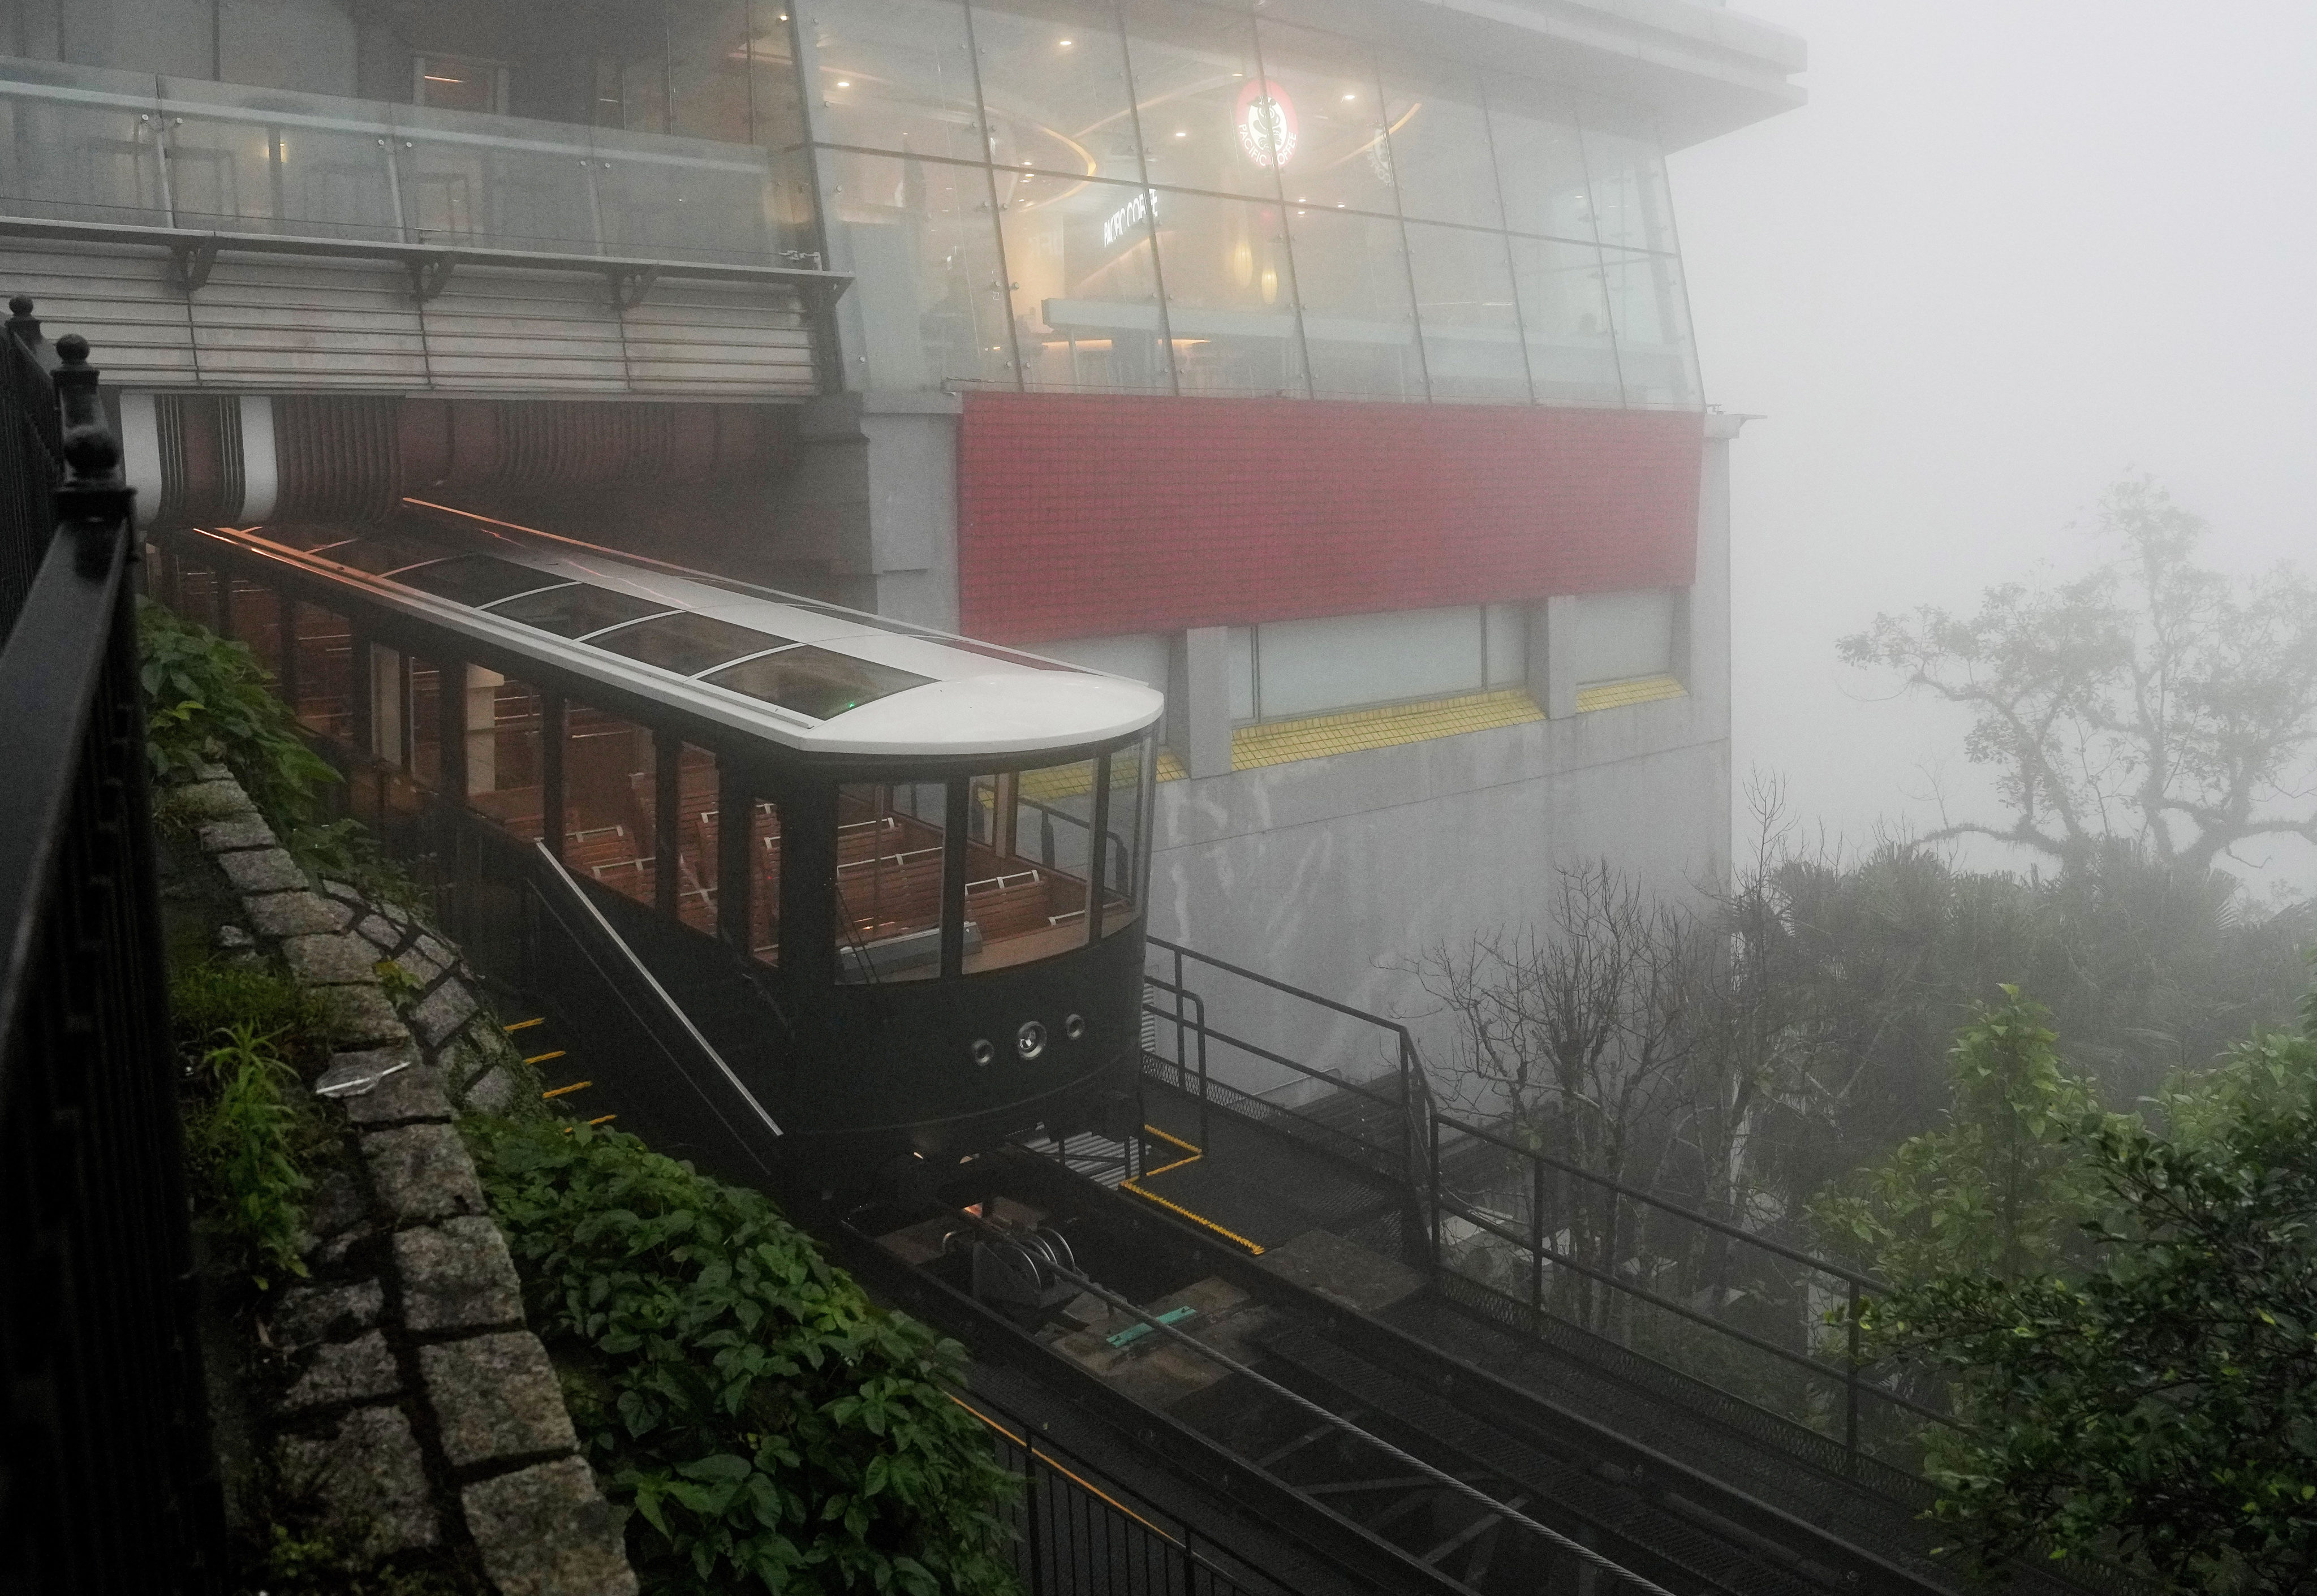 Strong winds and heavy rain toppled several trees near the Peak Tram’s Barker Road stop. Photo: Elson Li